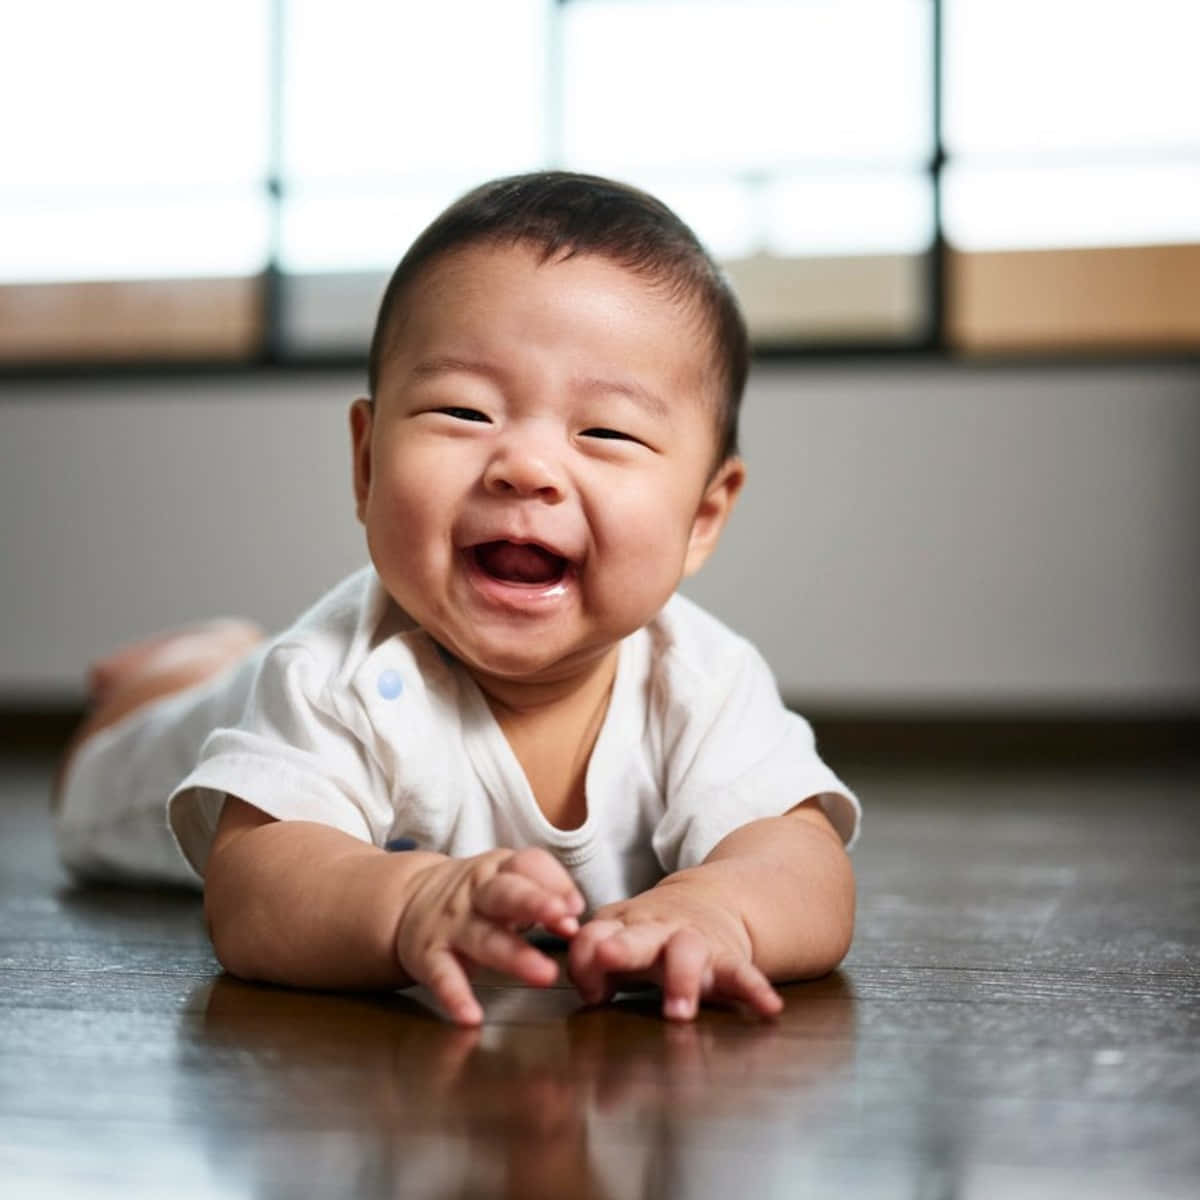 A Baby Is Laughing On The Floor